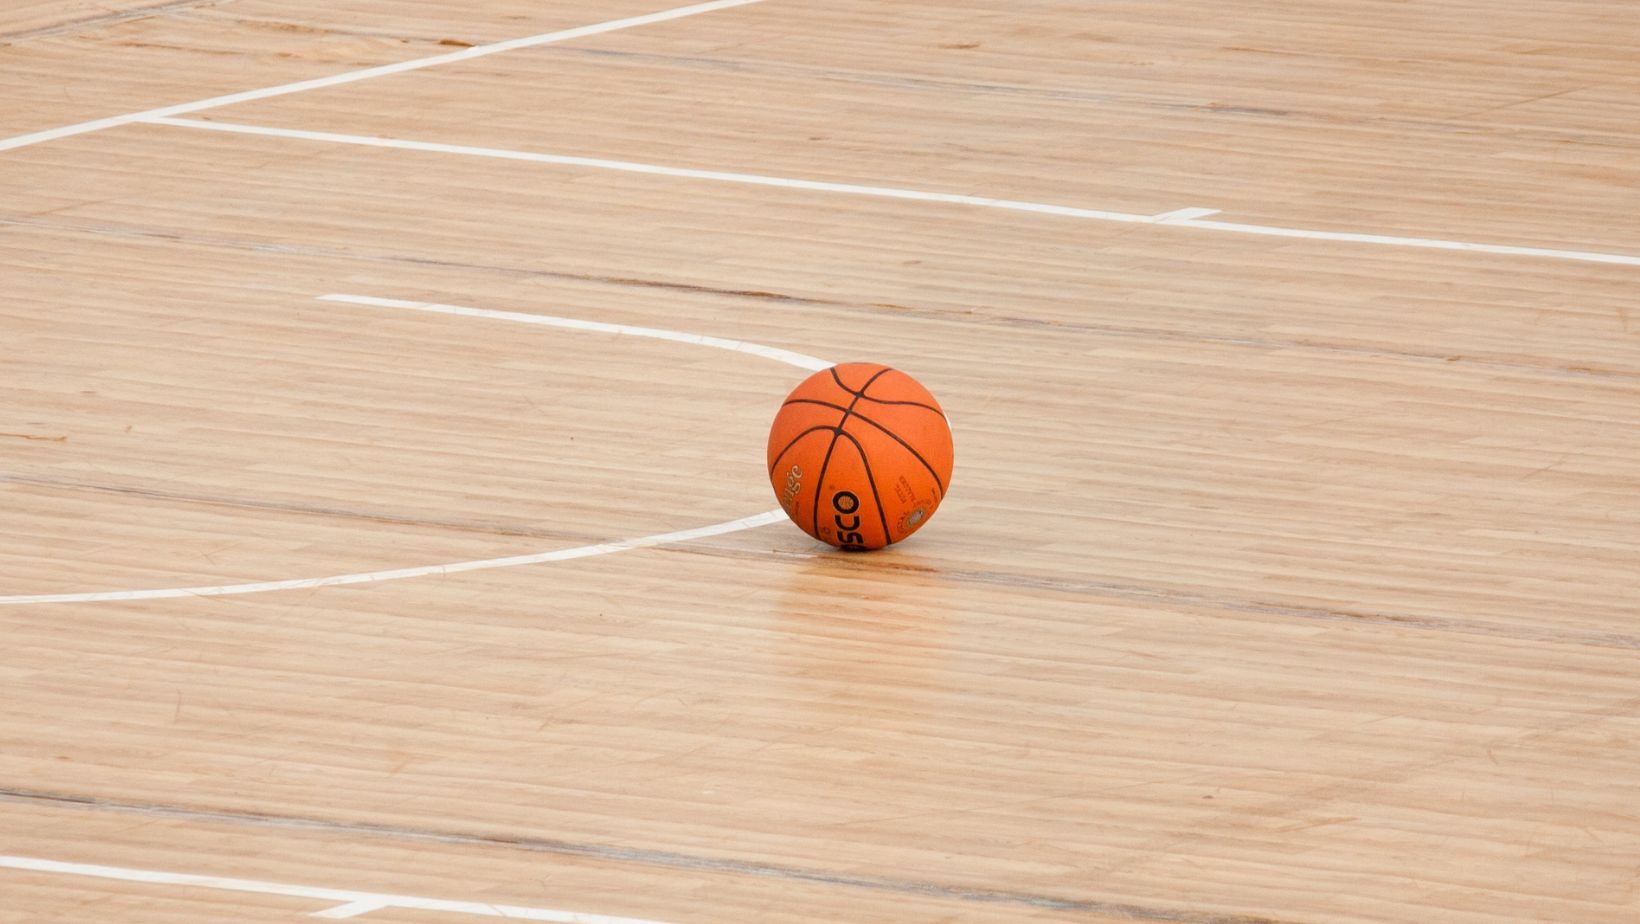 Why Choose ZSFloortech as Your Sports Flooring Manufacturer?